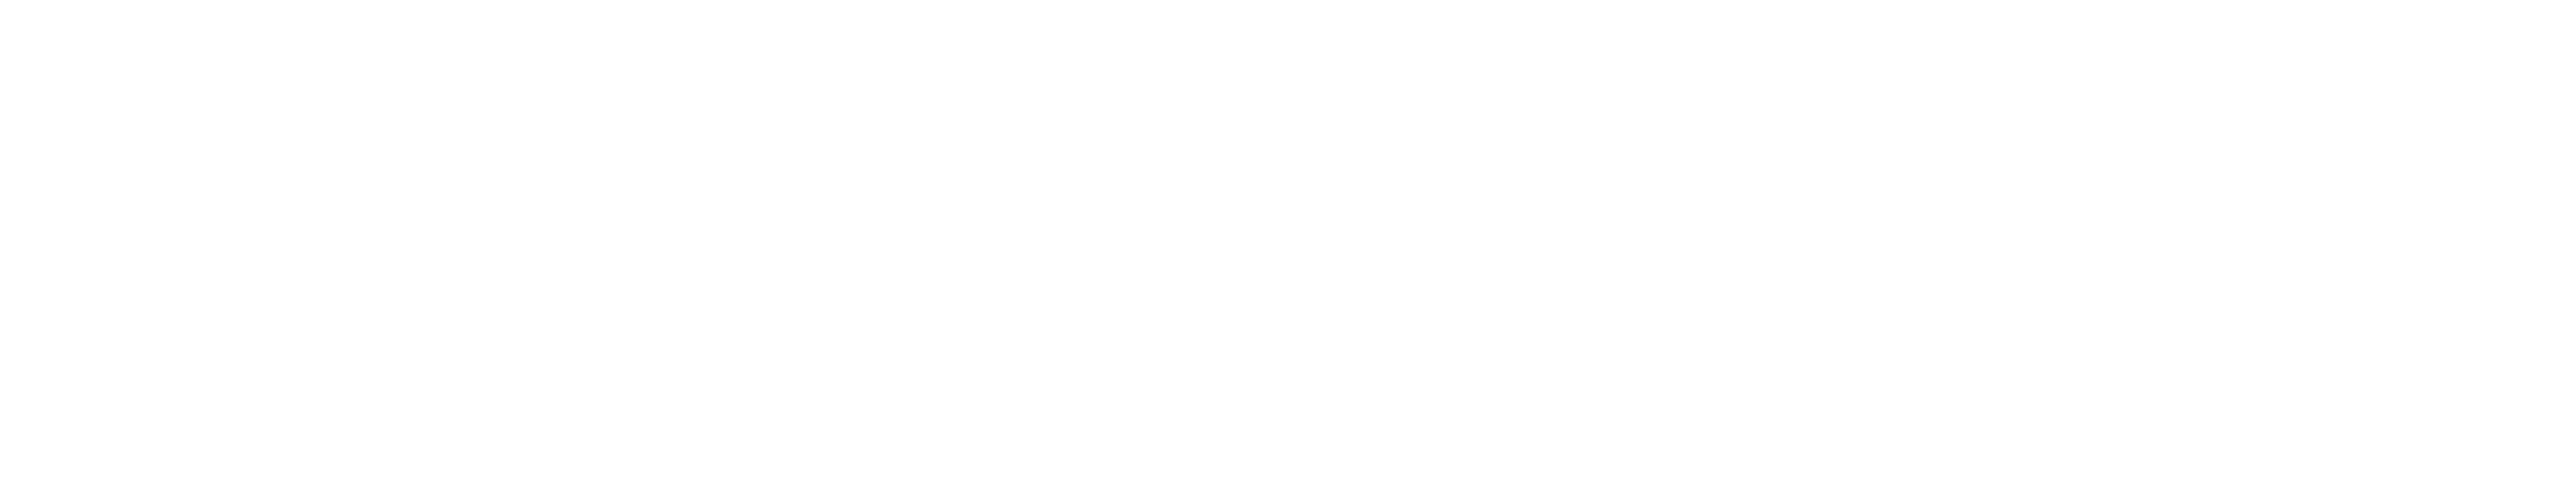 Middlebury Institute homepage